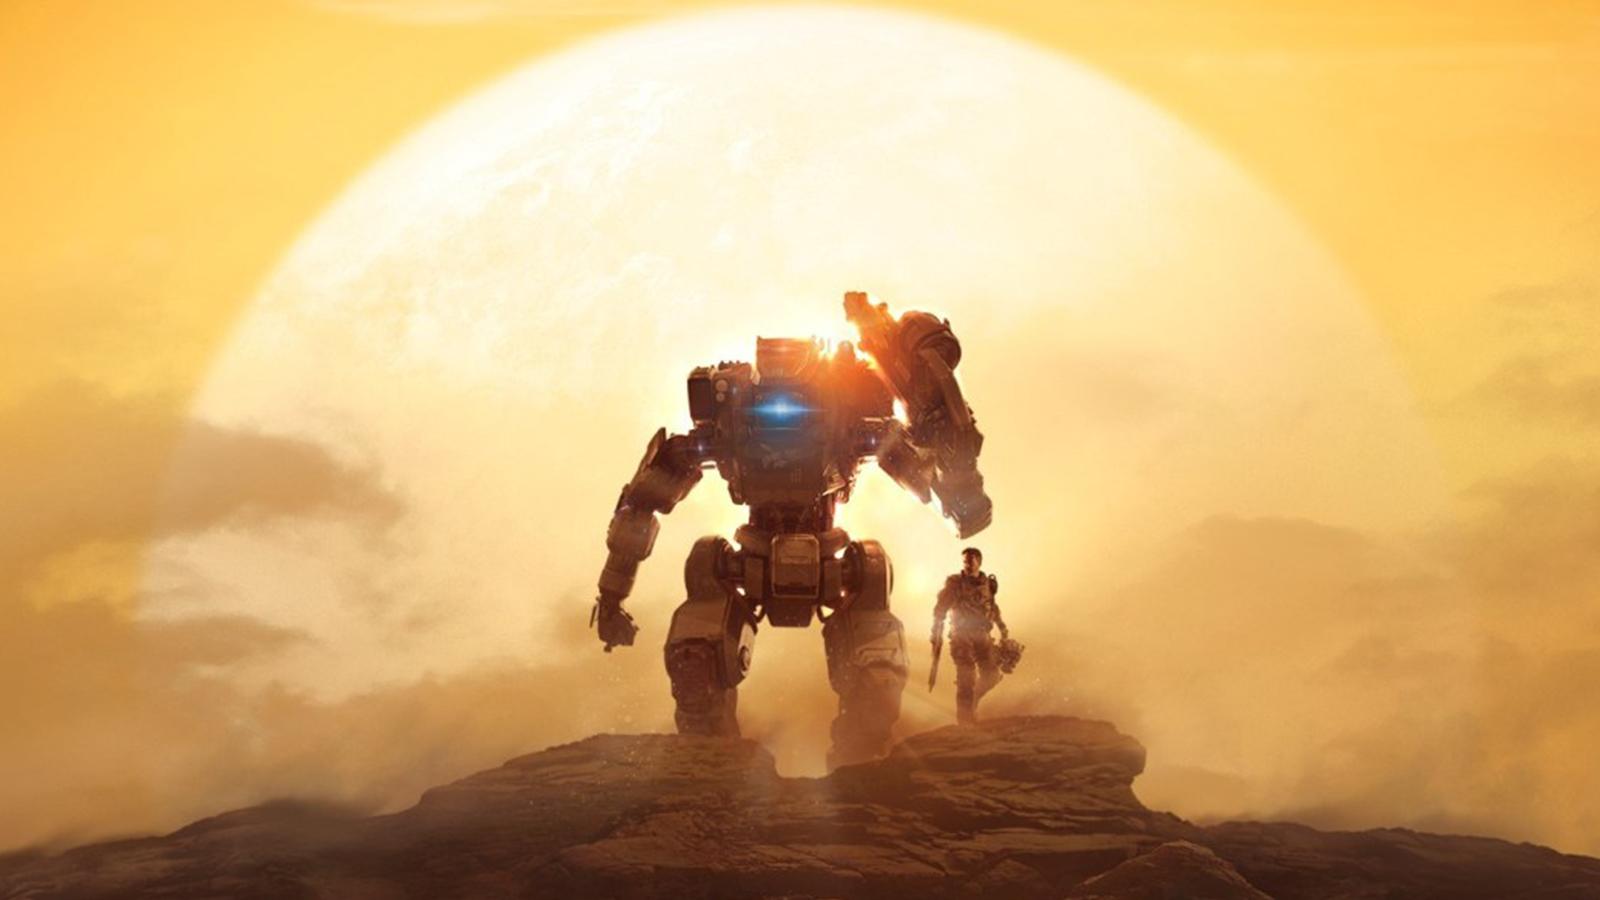 The Titanfall franchise has been left in limbo since EA acquired Respawn Entertainment.